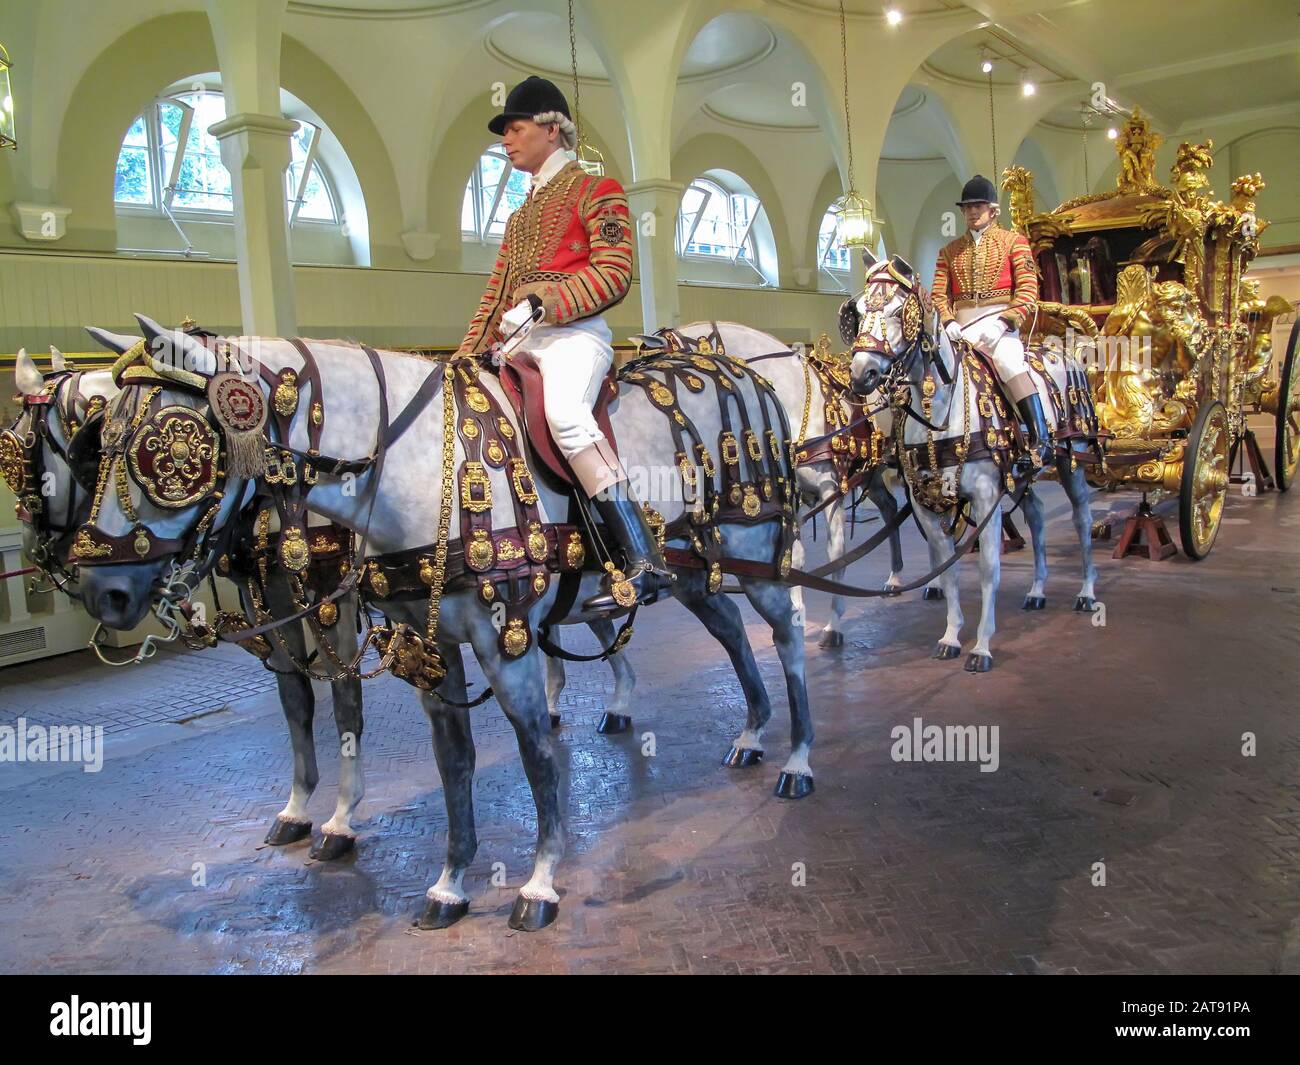 Royal Carriage in Mews london Stockfoto